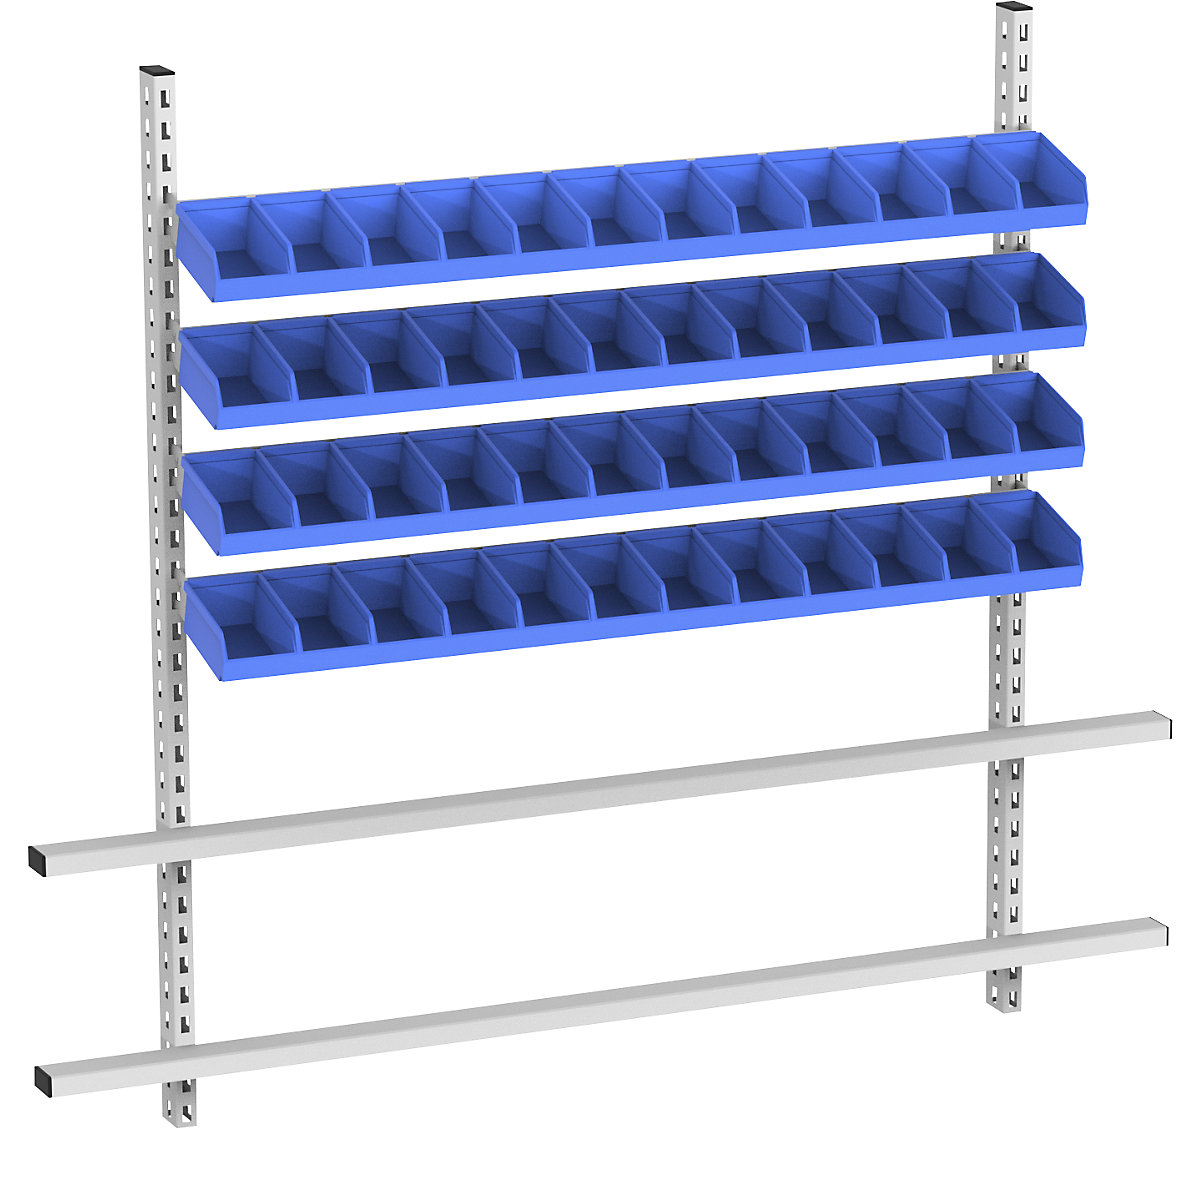 Add-on for table with open fronted storage bins, width 2030 mm, 4 rails with 48 boxes, bins in blue-1